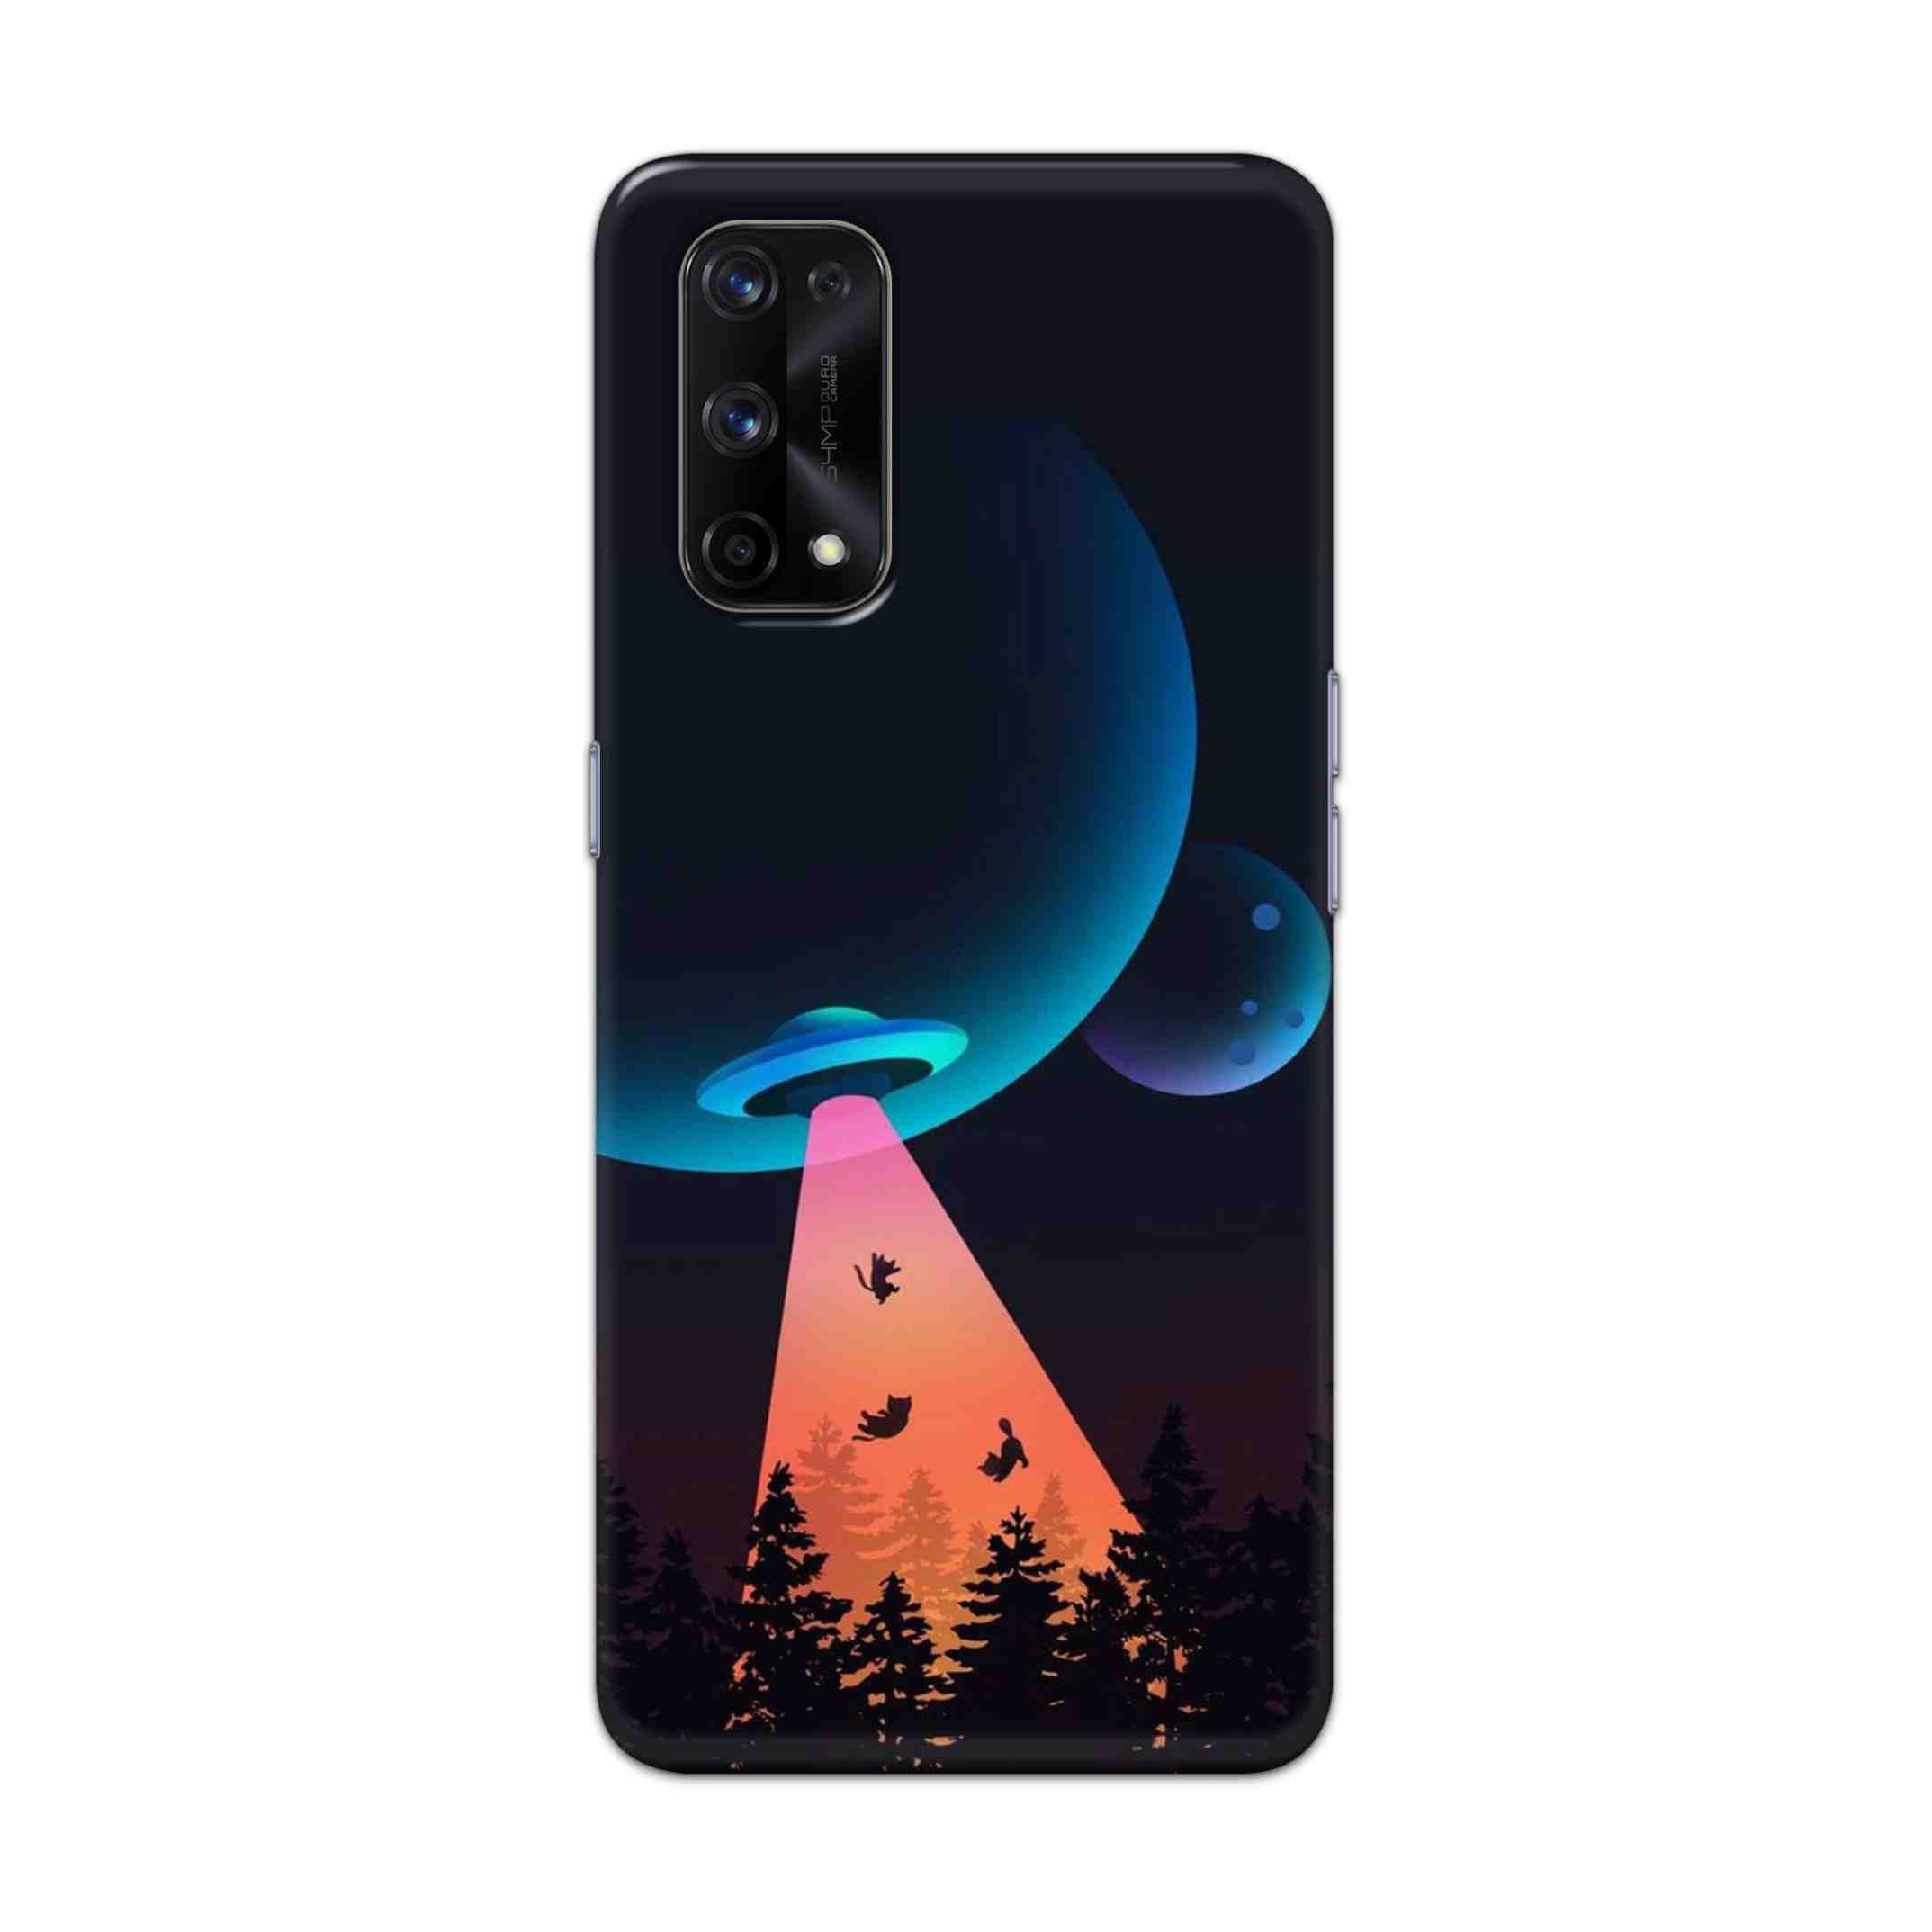 Buy Spaceship Hard Back Mobile Phone Case Cover For Realme X7 Pro Online